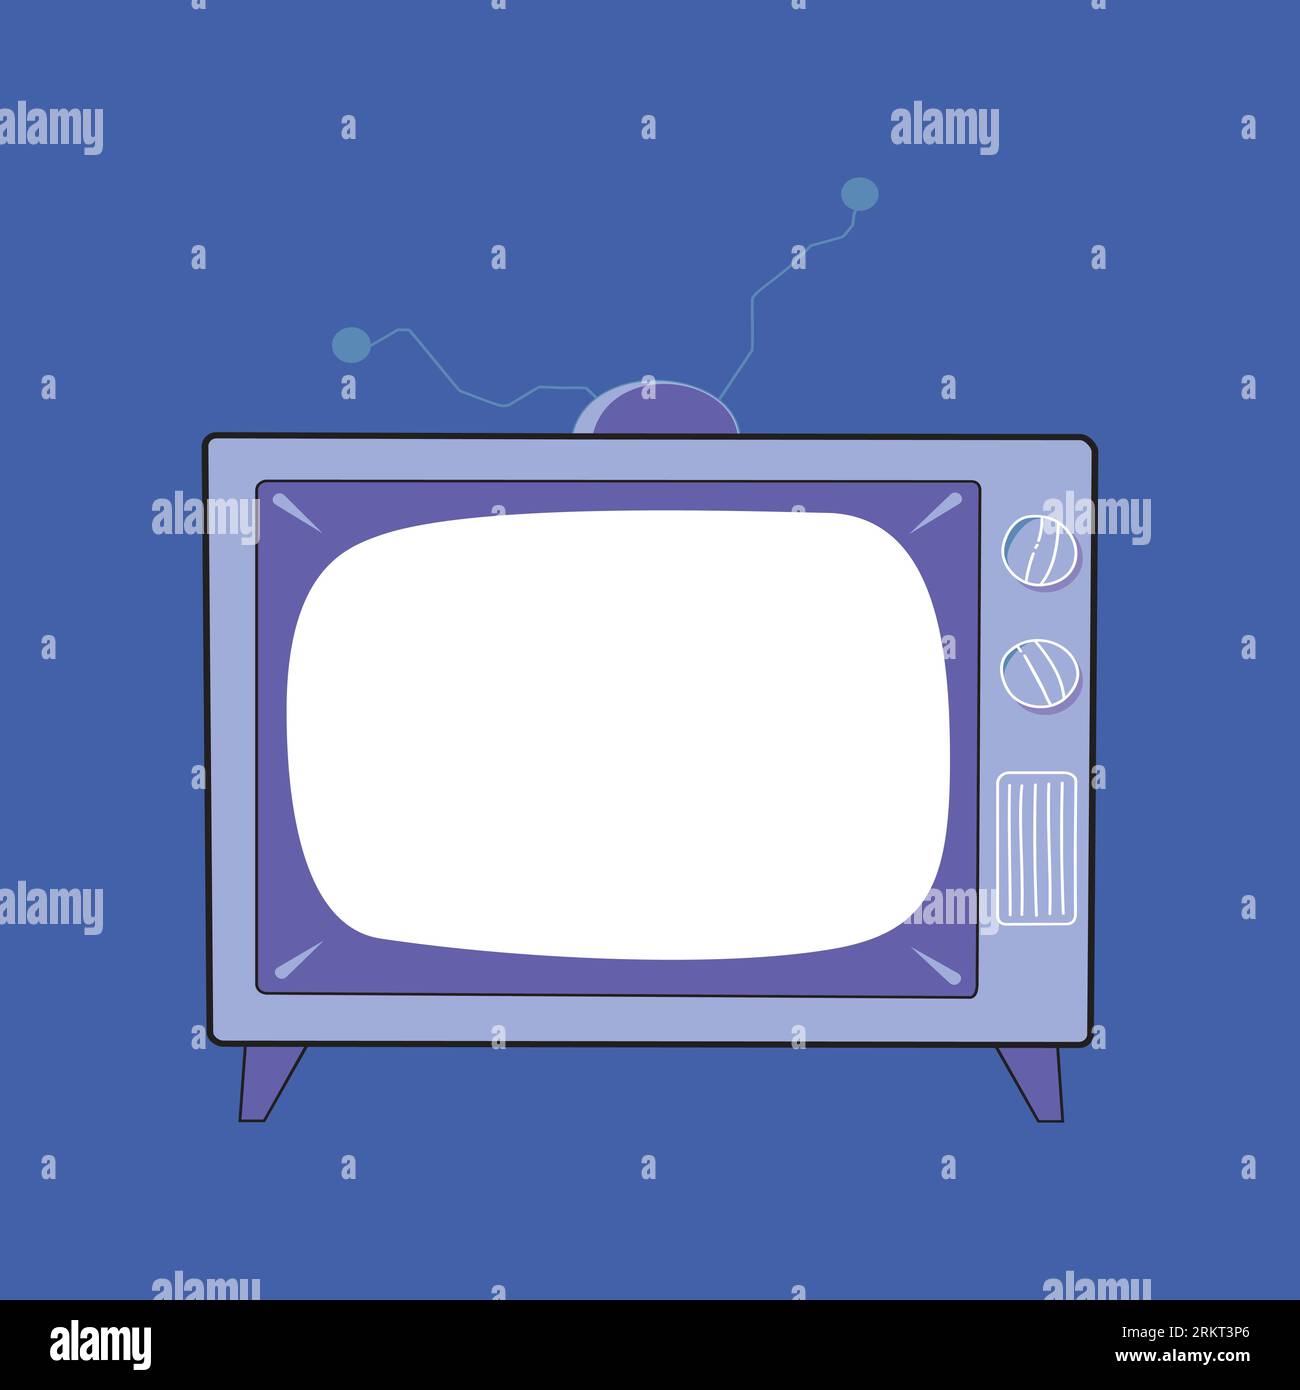 Family watching old tv vector design Stock Vector